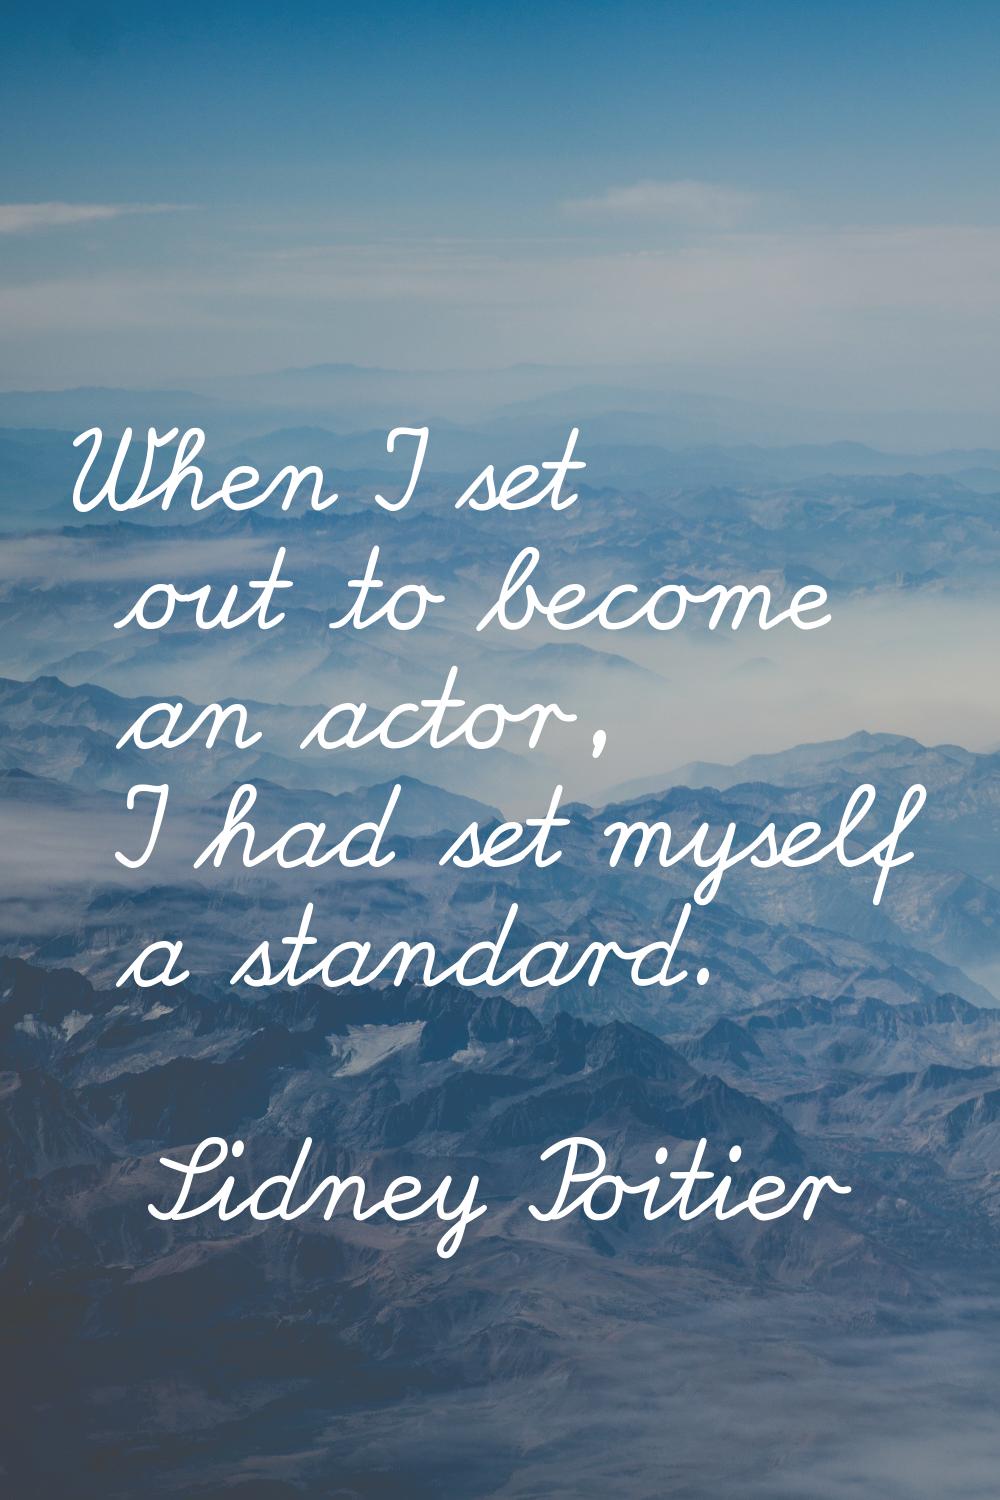 When I set out to become an actor, I had set myself a standard.